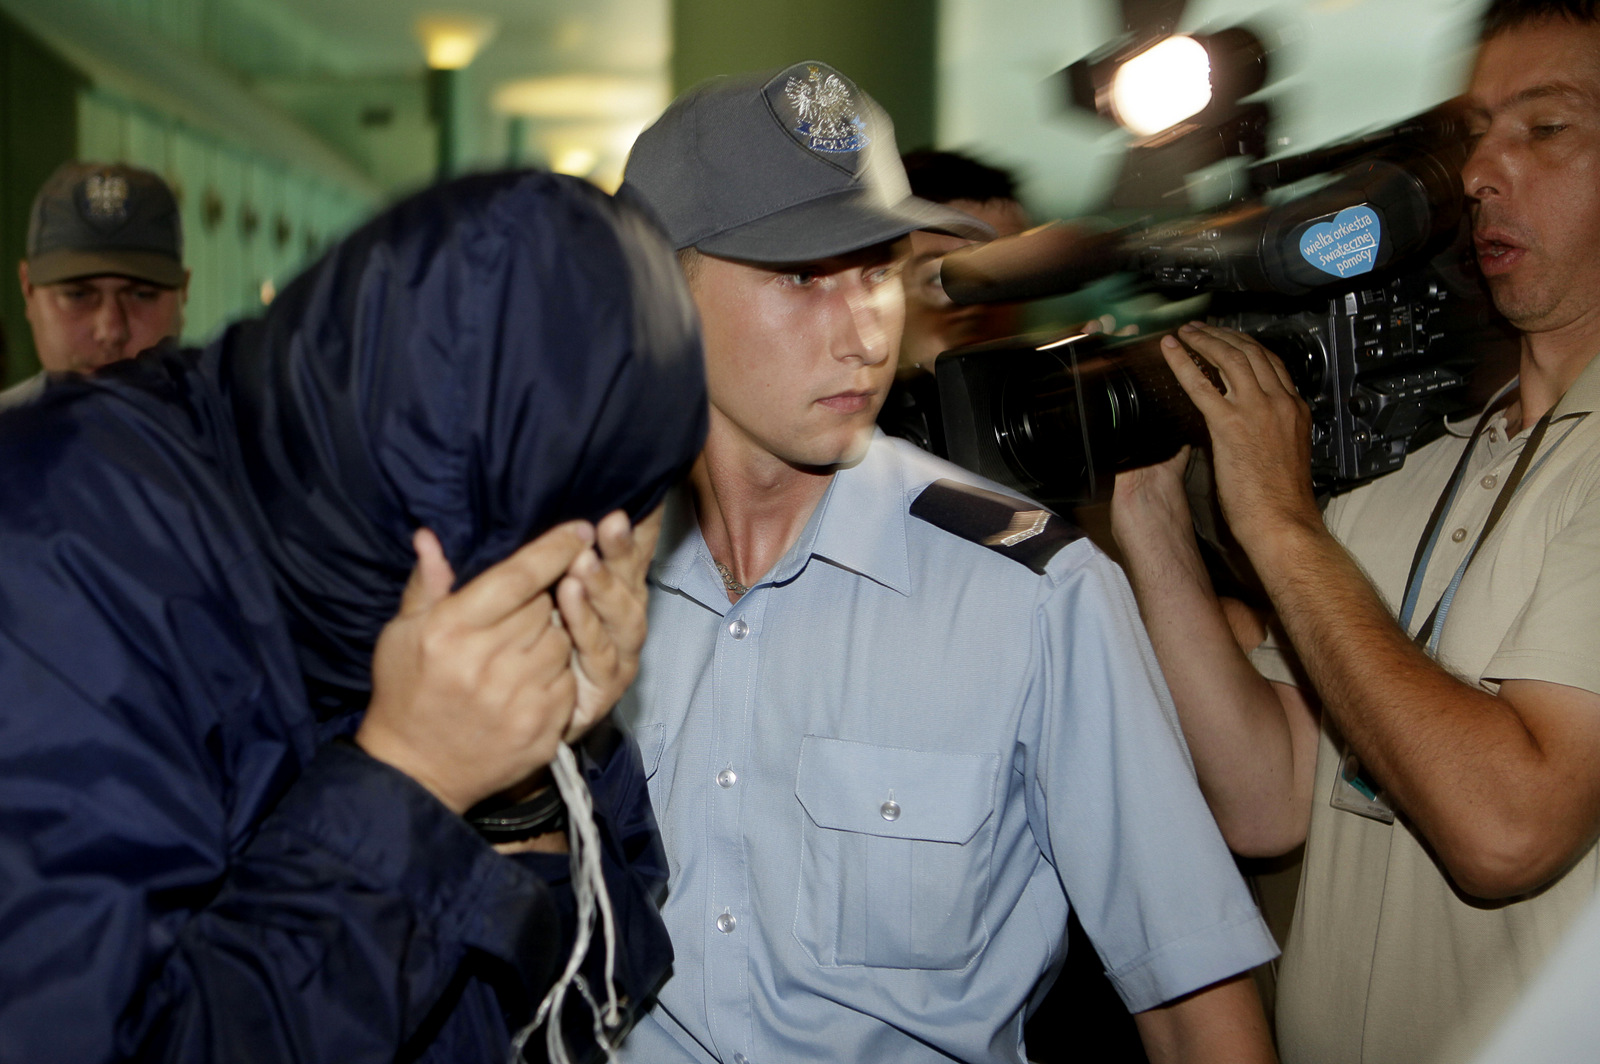 Uri Brodsky, believed to be a Mossad agent involved in the assassination of Mahmoud al-Mabhouh, is escorted by police to a court of appeal session in Warsaw, Poland, Aug. 5, 2010. (AP/Czarek Sokolowski)